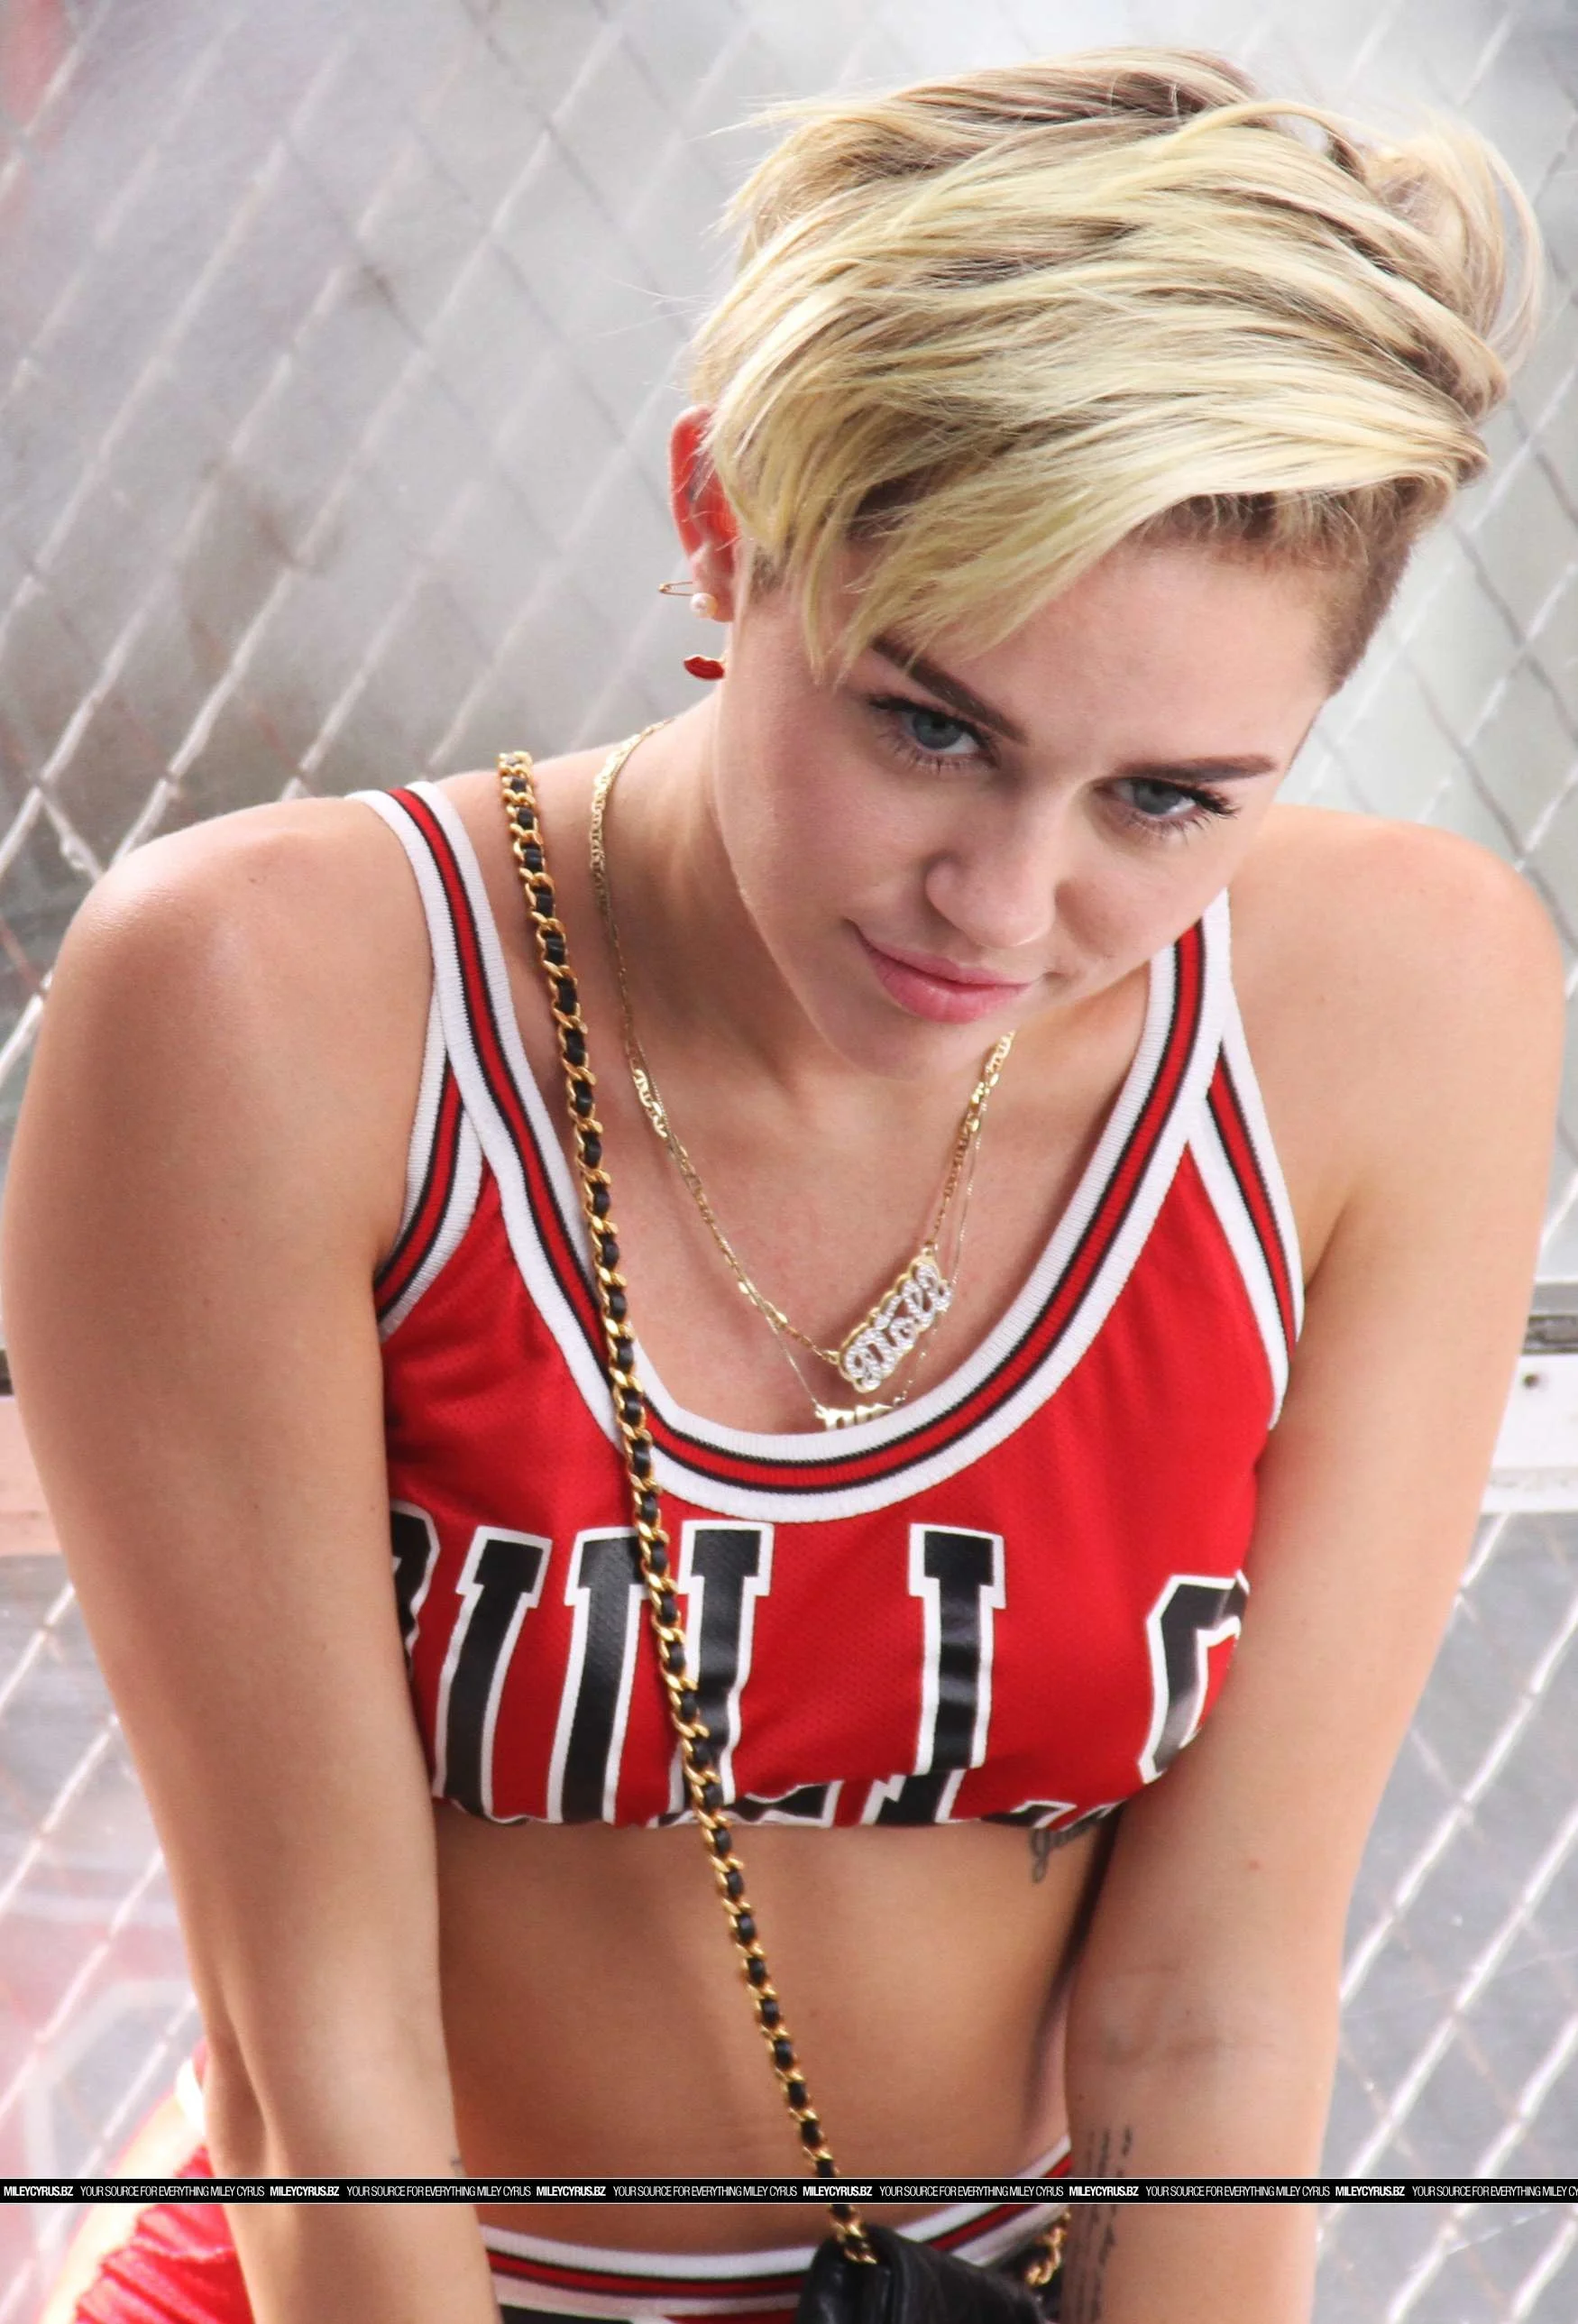 Miley Cyrus – 23 Music Video Portraits -03 – Full Size